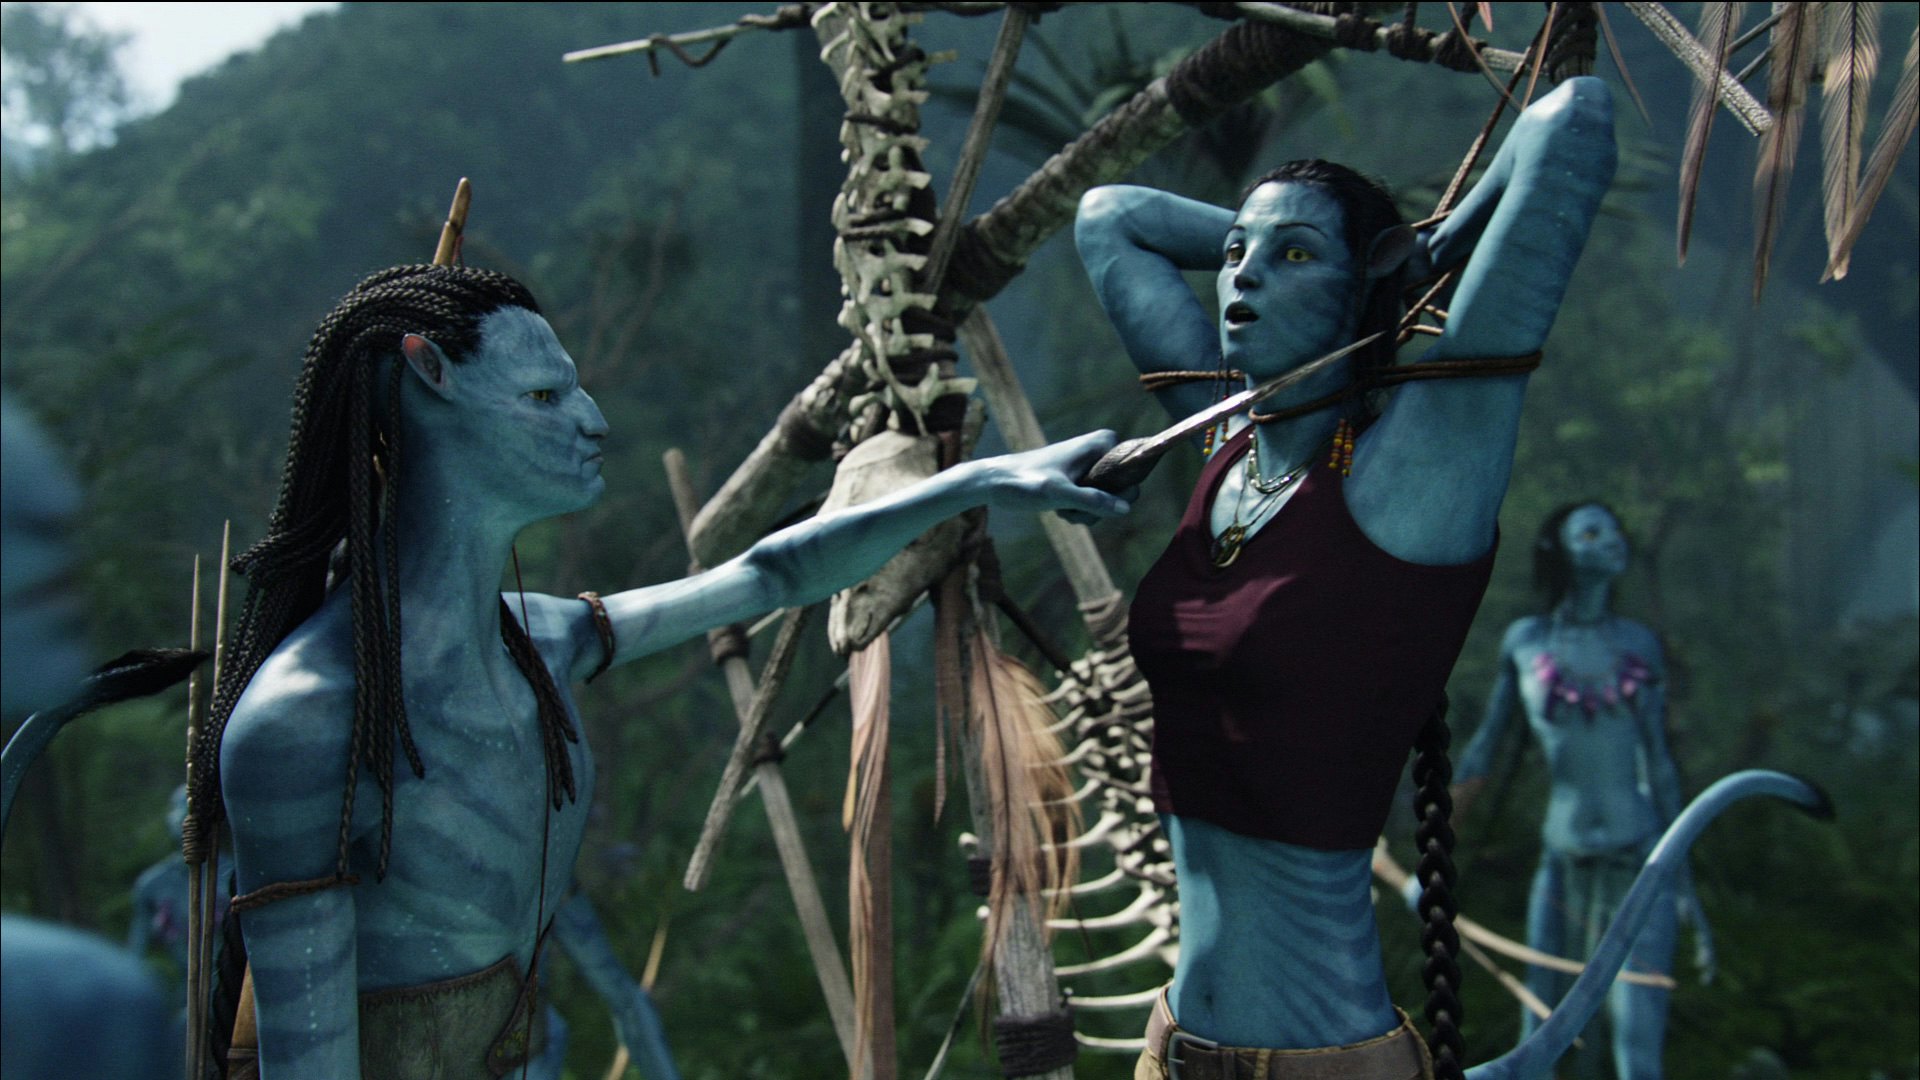 7 facts you need to remember about Avatar before seeing The Way of Water